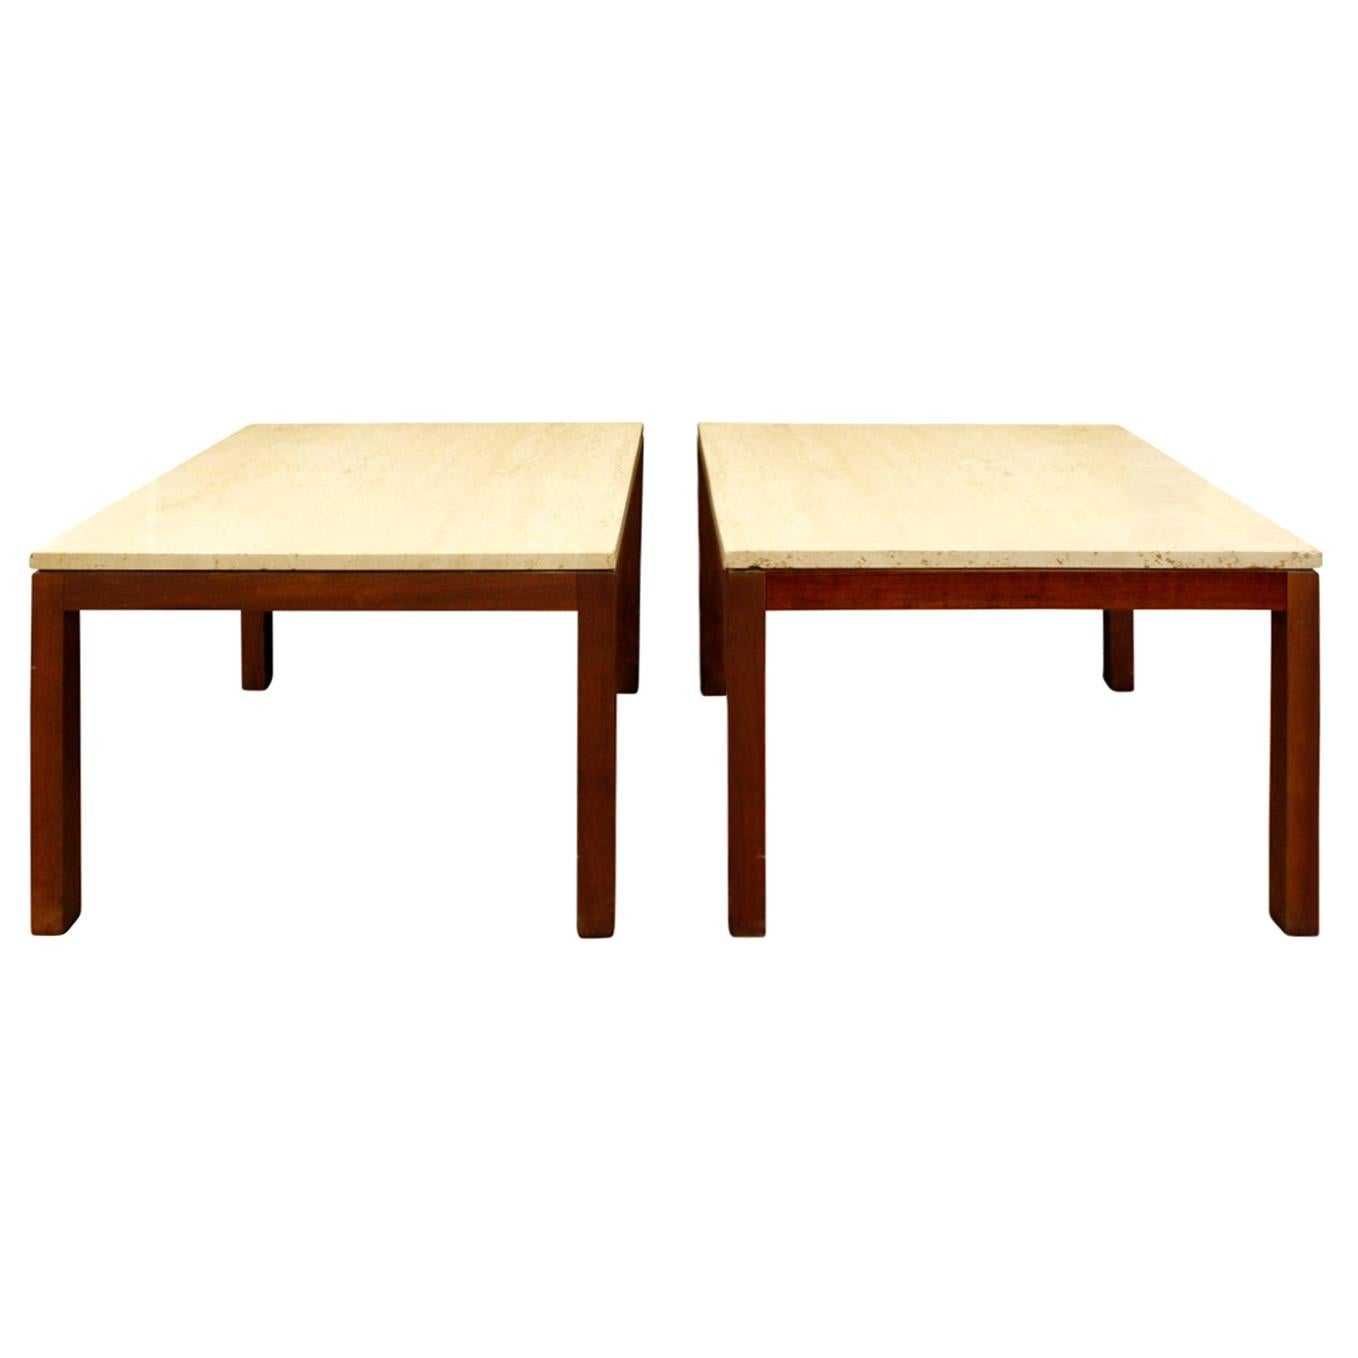 Pair of Clean Line End Tables in Teak and Travertine, 1970s